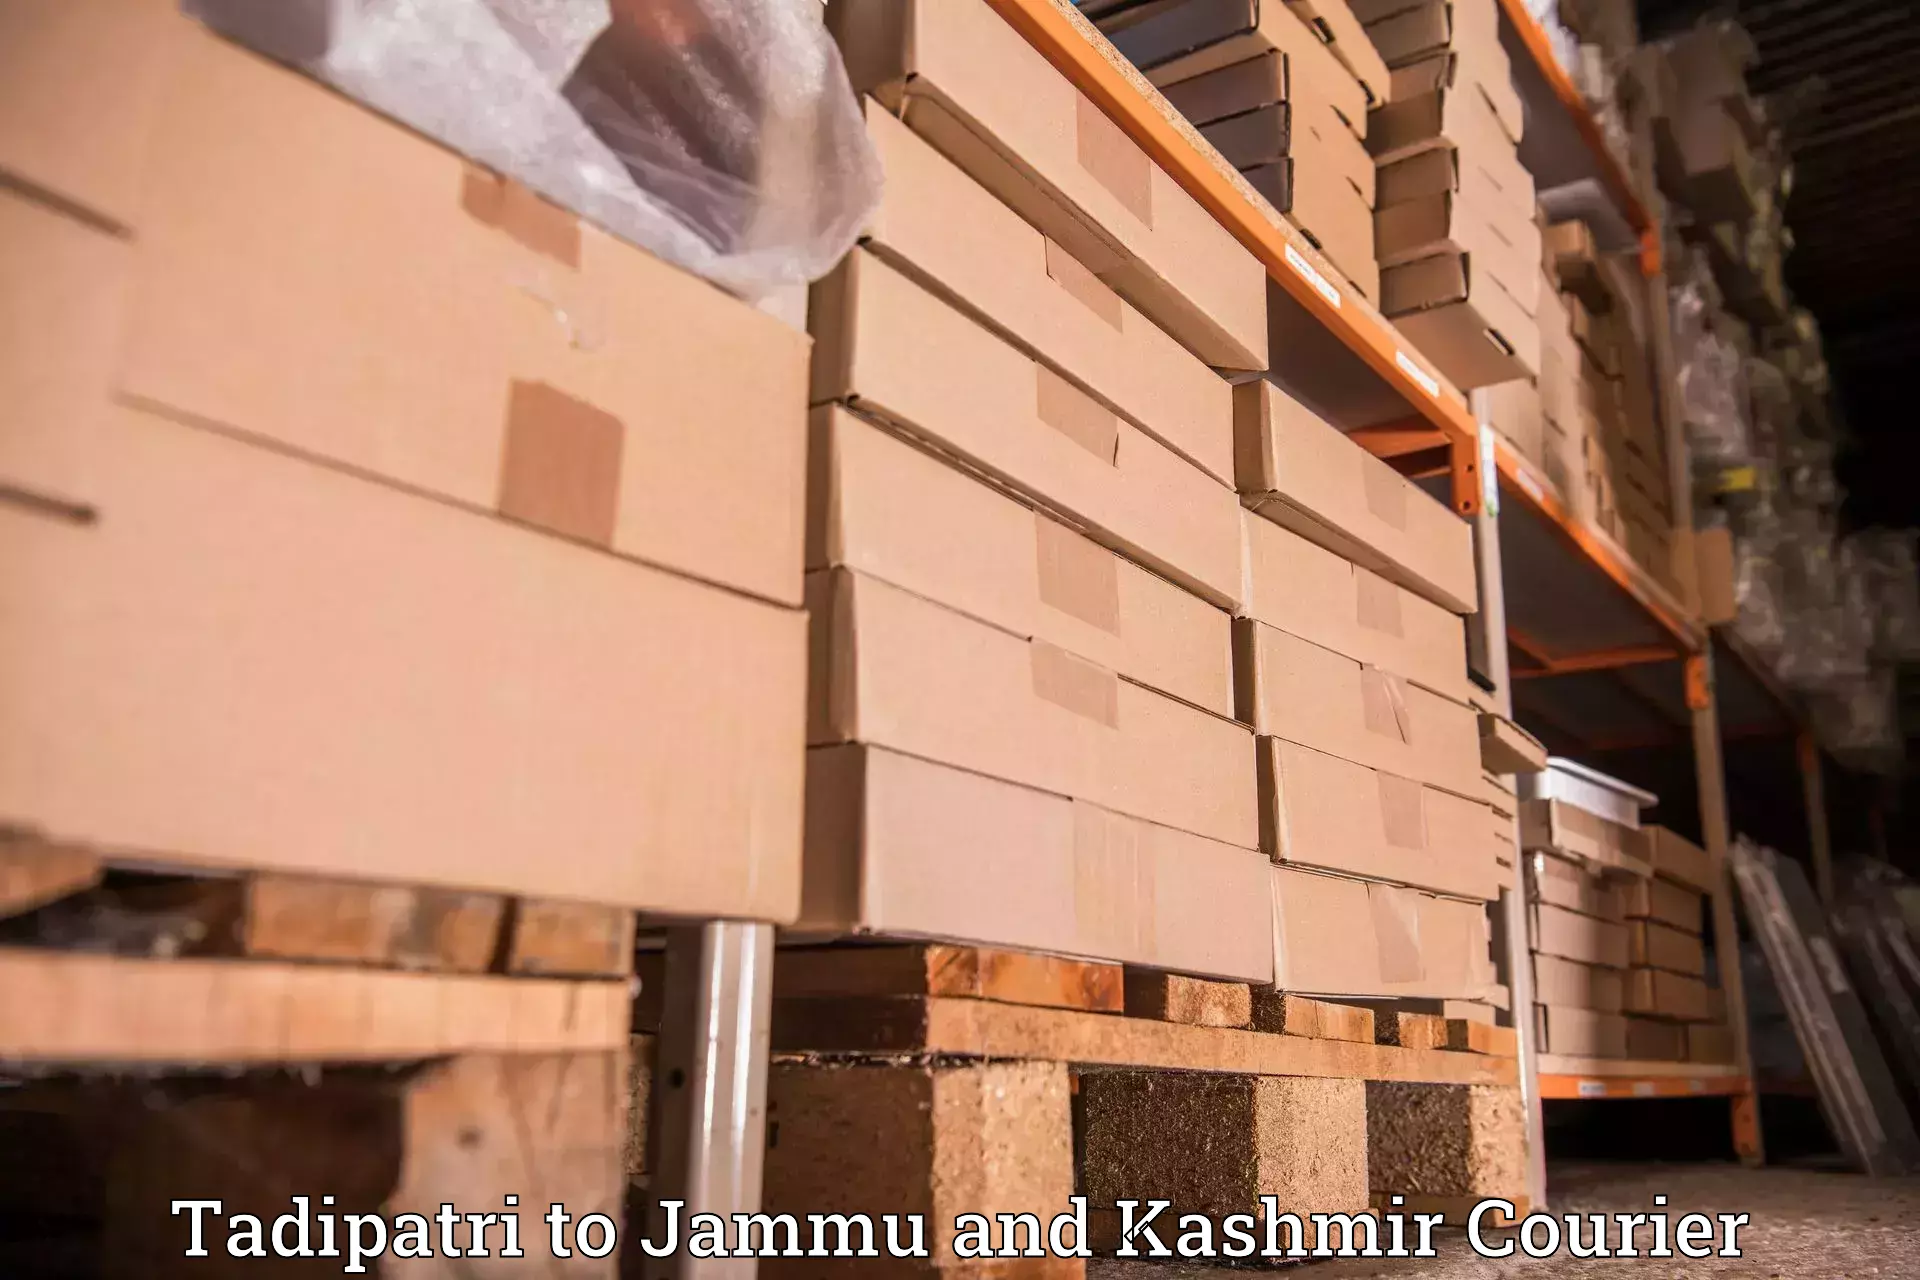 Courier service booking Tadipatri to Udhampur